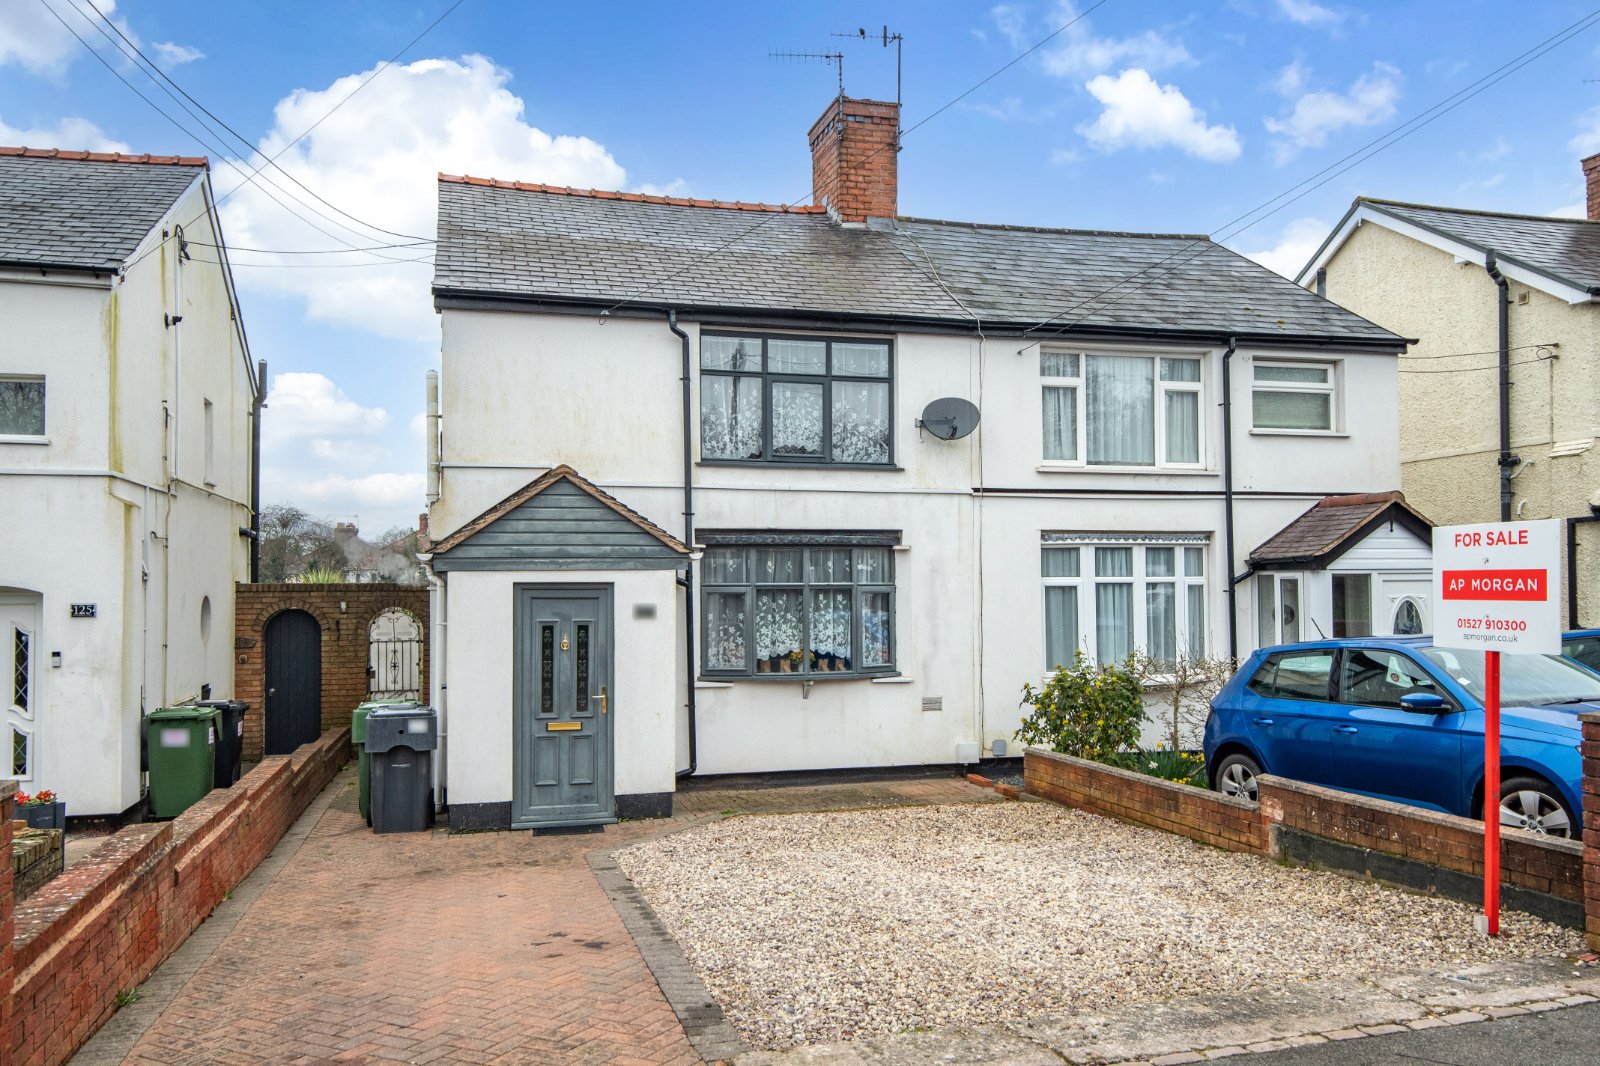 3 bed house for sale in Woodrow Lane, Catshill  - Property Image 1